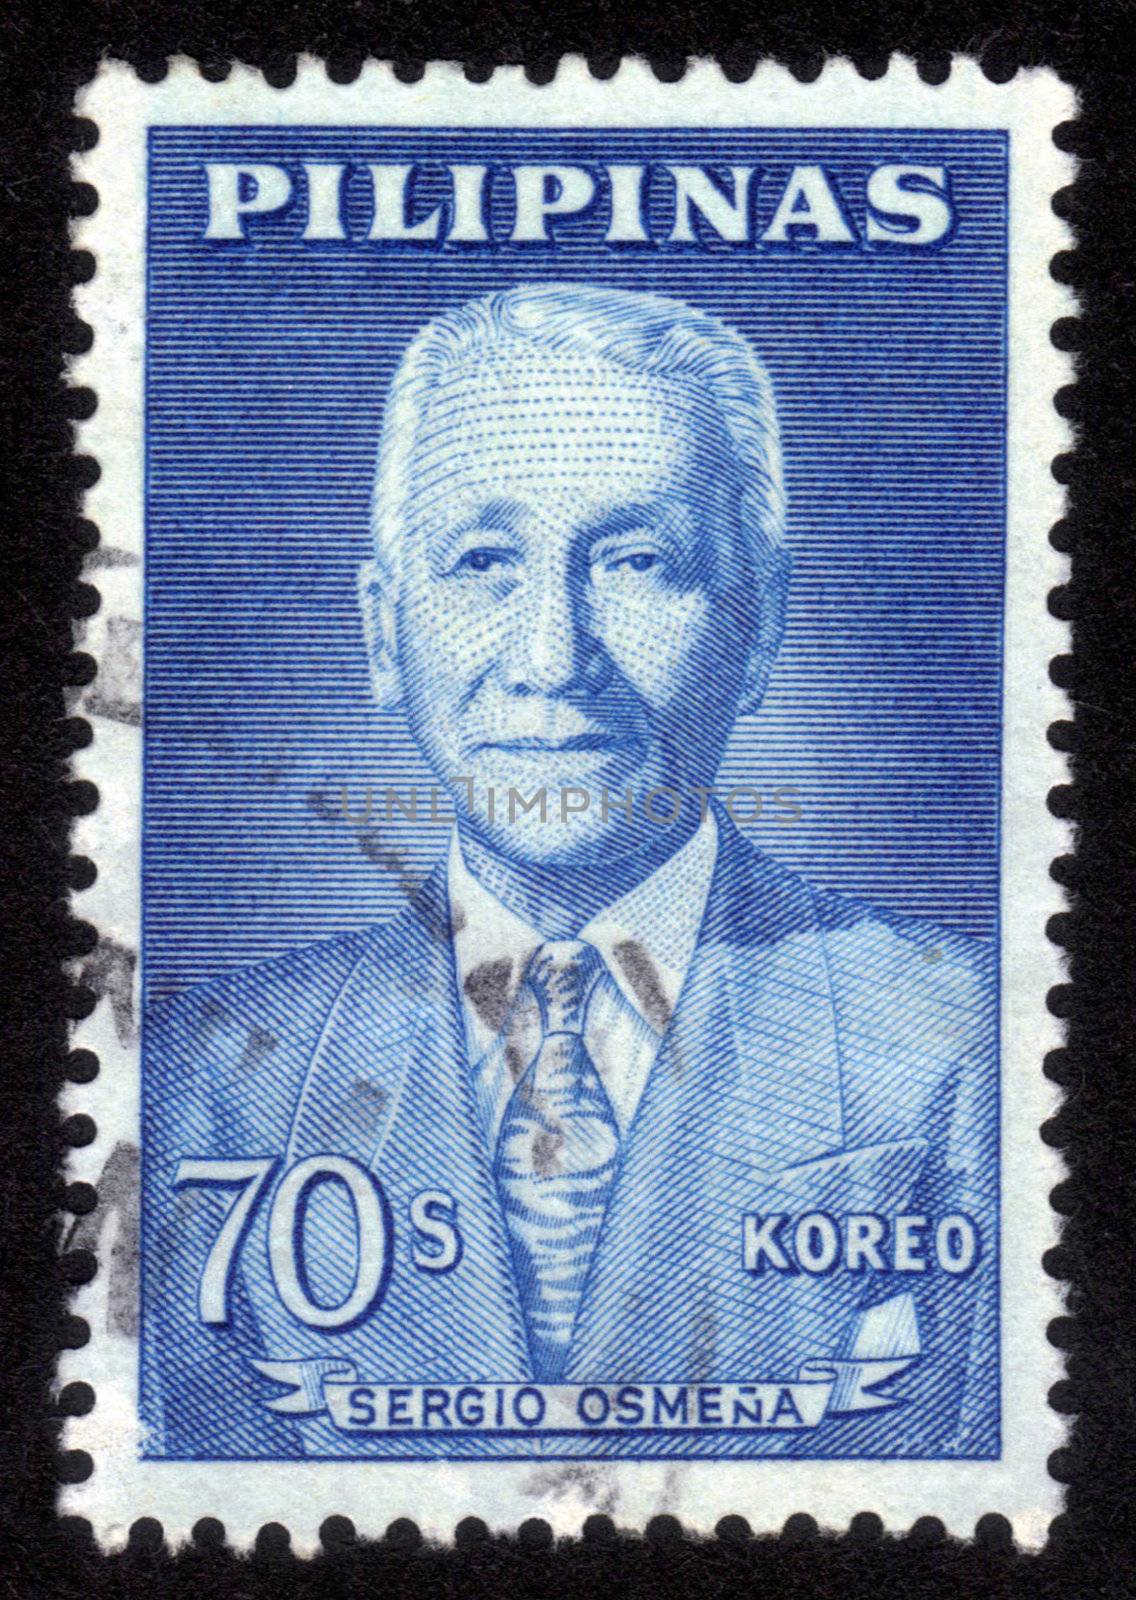 PHILIPPINES - CIRCA 1962: A stamp printed in Philippines shows Portrait Sergio Osmena y Suico was a Filipino politician , the 4th President of the Philippines from 1944 to 1946, circa 1962